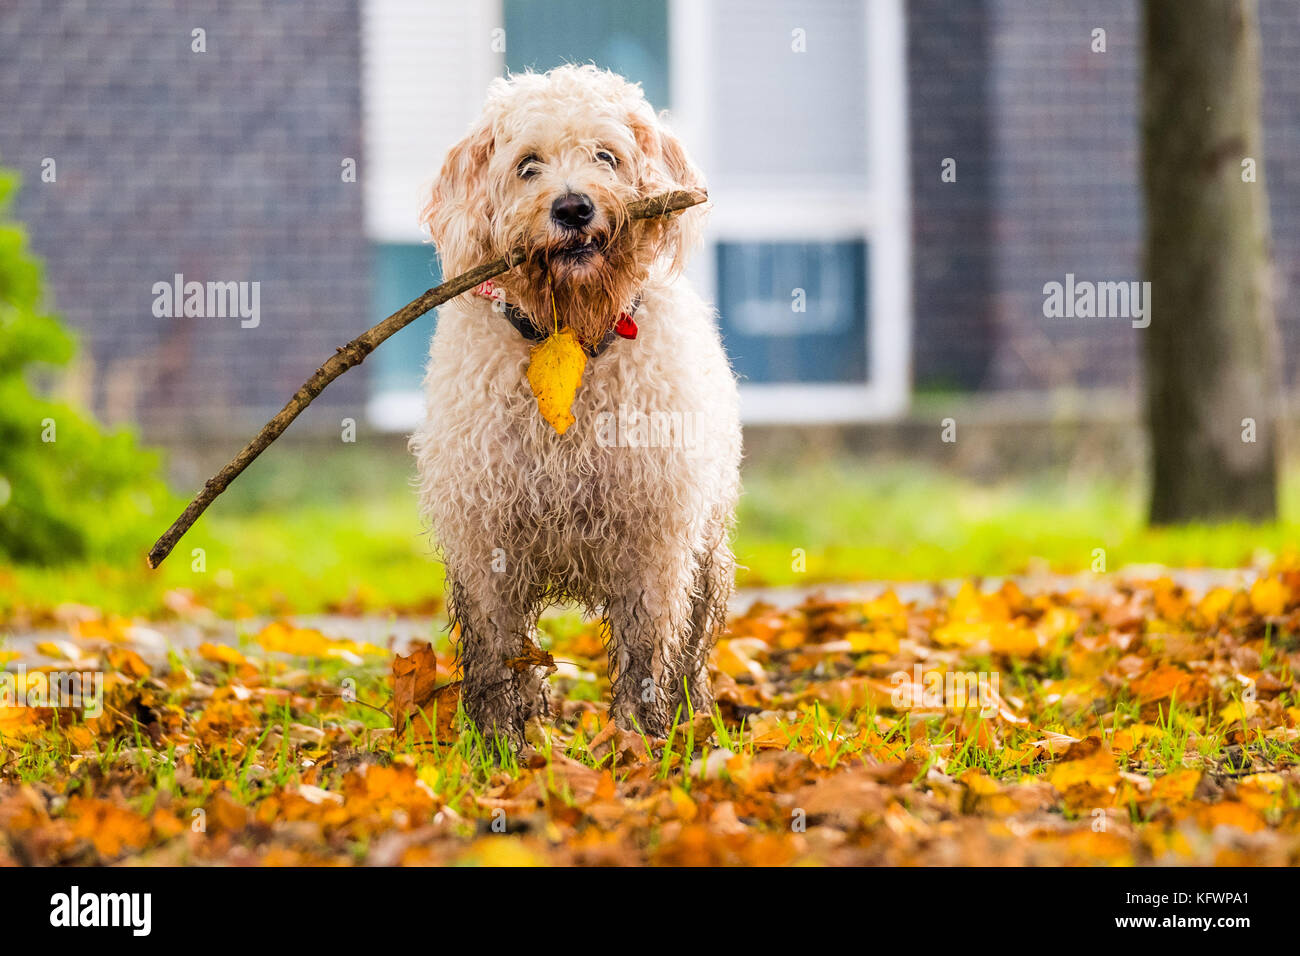 Aberystwyth Wales UK, Wednesday 1 November 2017 UK weather: DARWIN, a two and a half year old Labradoddle, enjoys an outing to Plascrug Avenue in Aberystwyth on the first day of November, with all the deciduous trees shedding their leaves in a myriad of rich autumnal colours photo Credit: Keith Morris/Alamy Live News Stock Photo